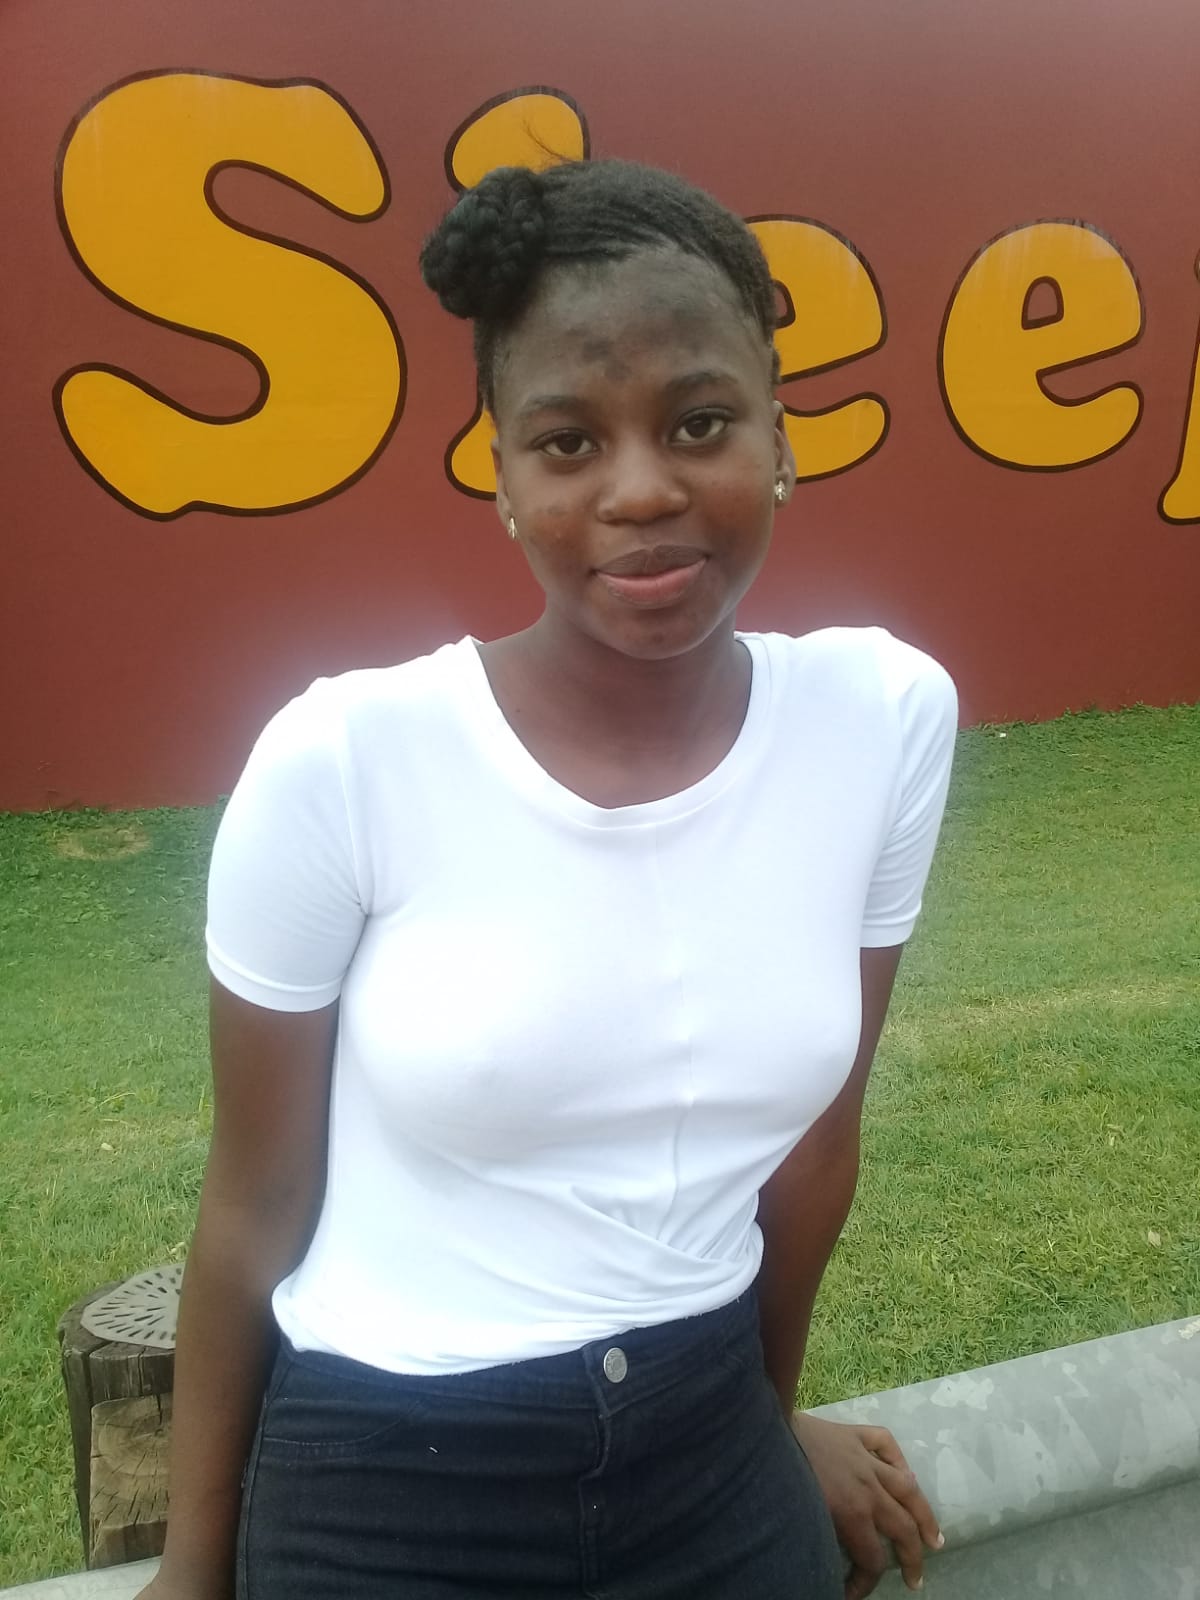 Police in Lebowakgomo request public assistance in locating a missing teenage girl